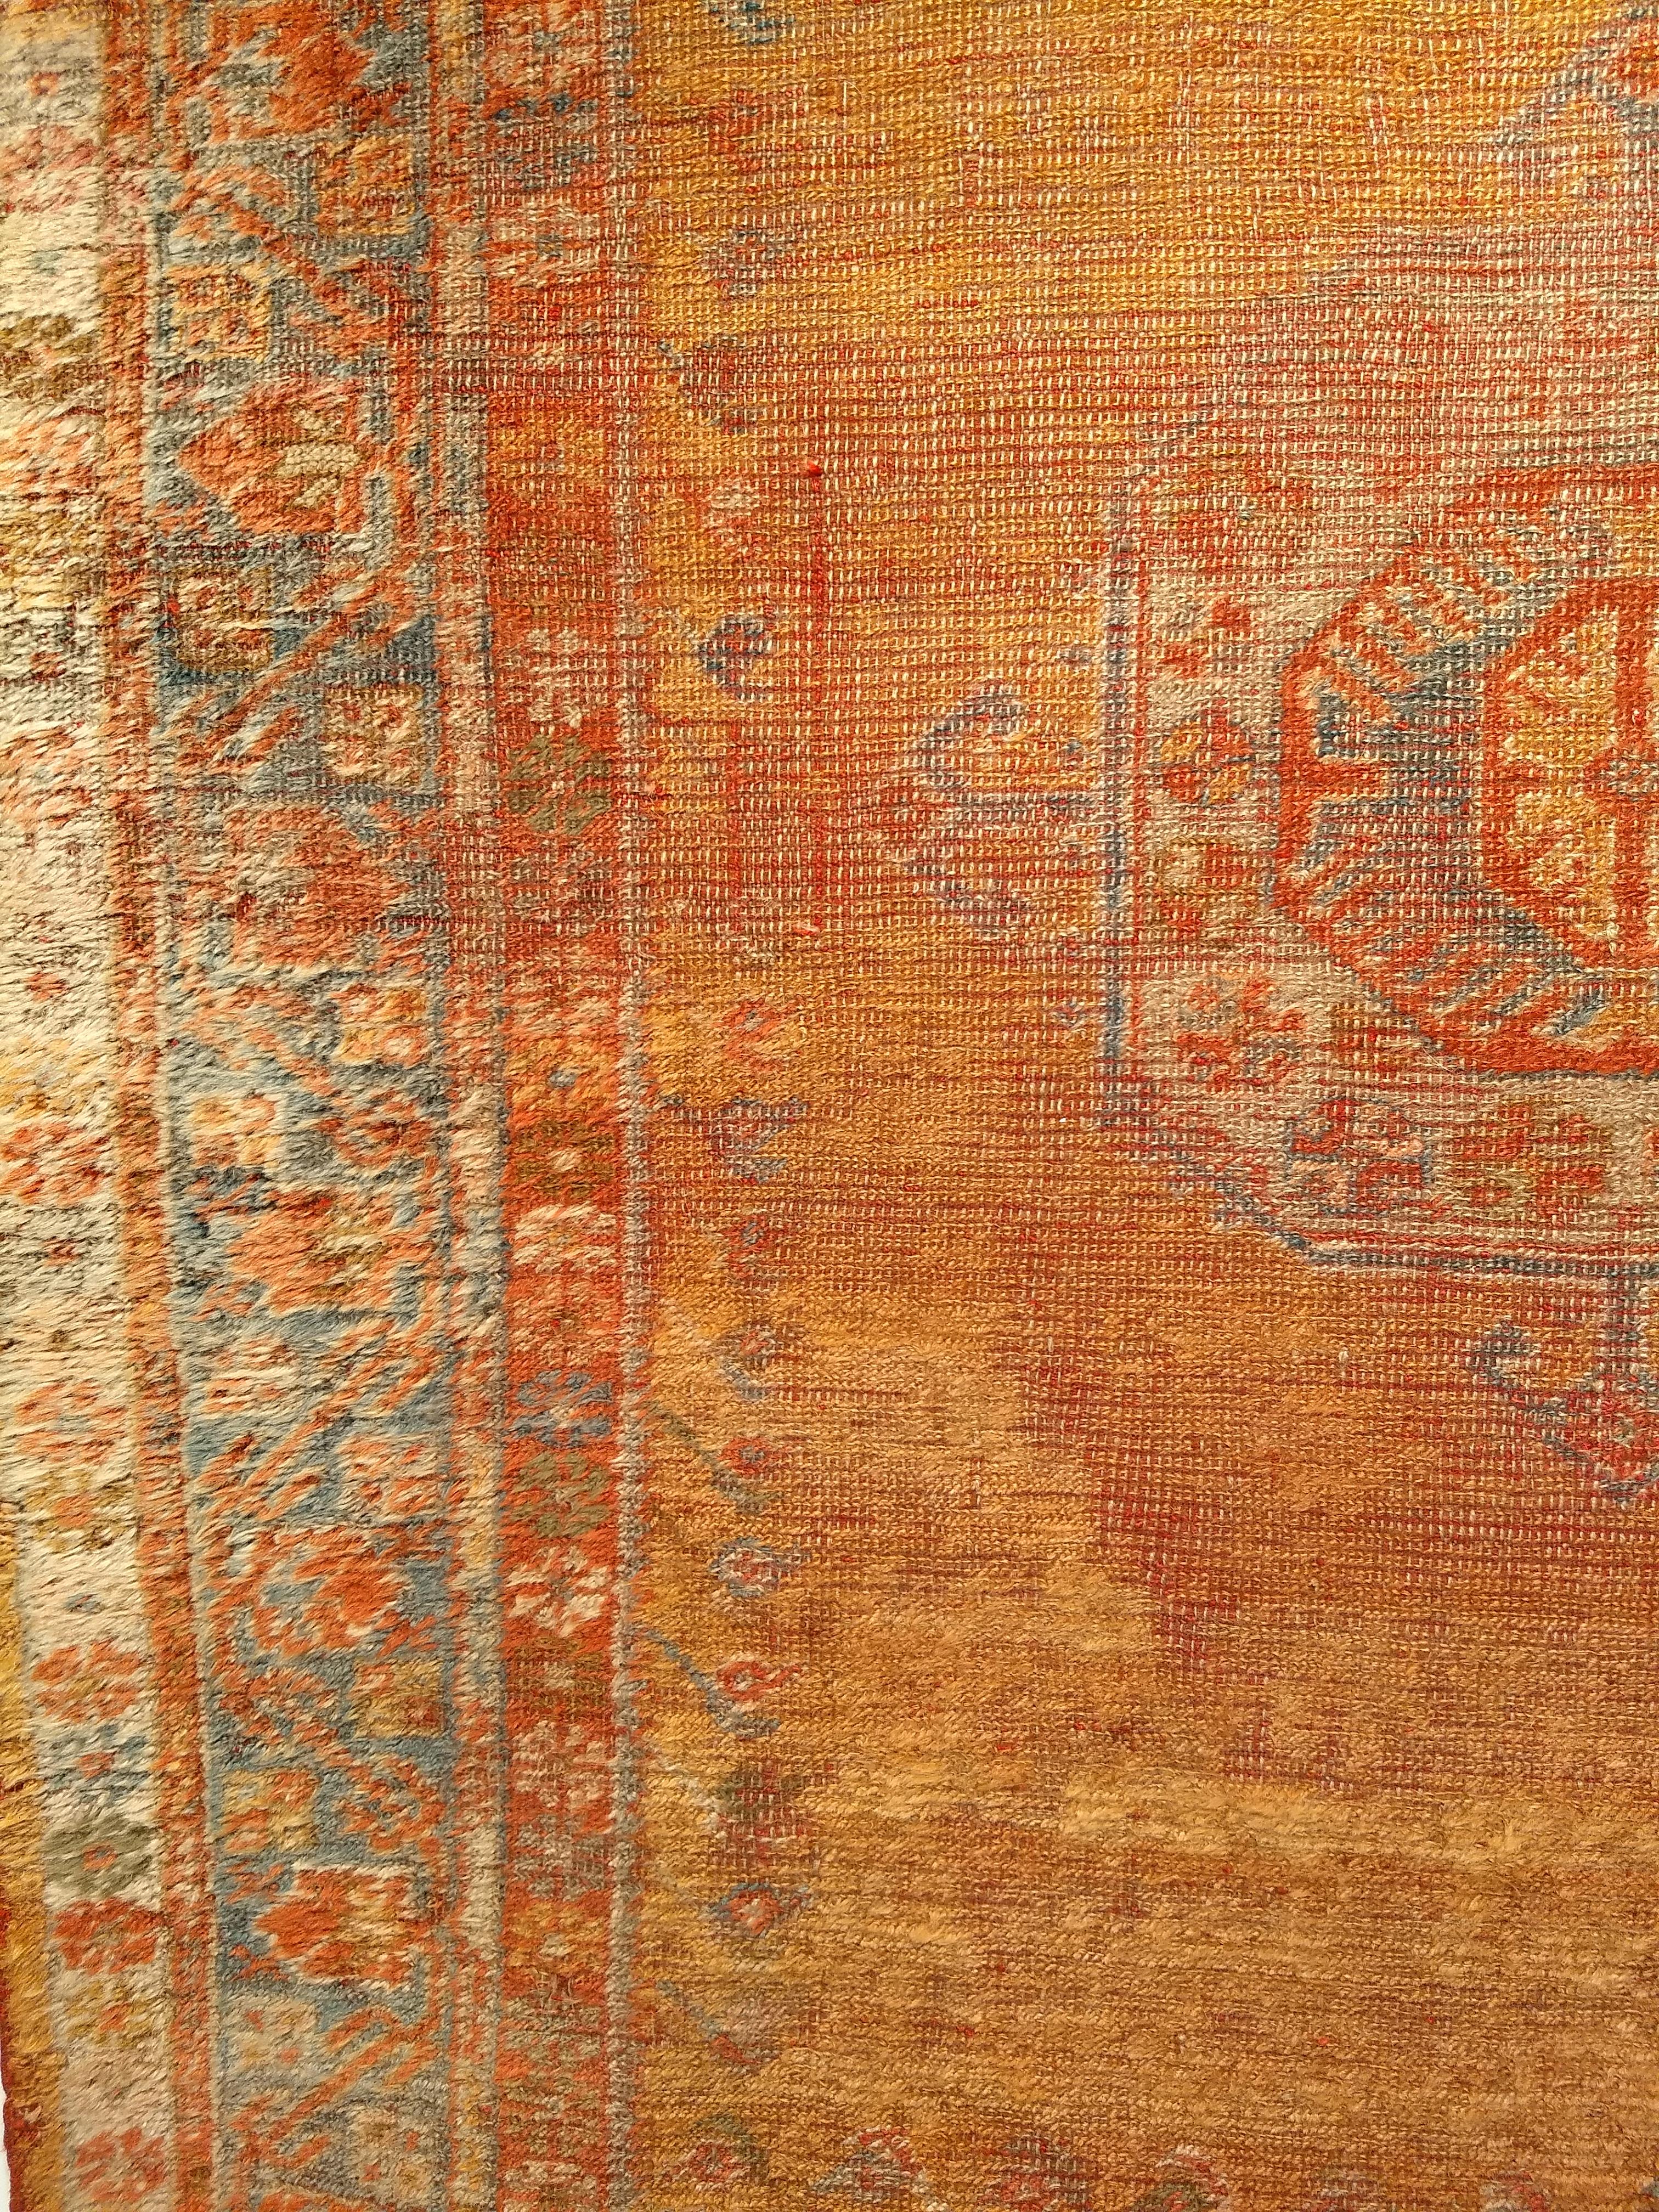 Late 19th Century Turkish Oushak Area Rug in Mamluk Pattern in Saffron, Teal For Sale 4